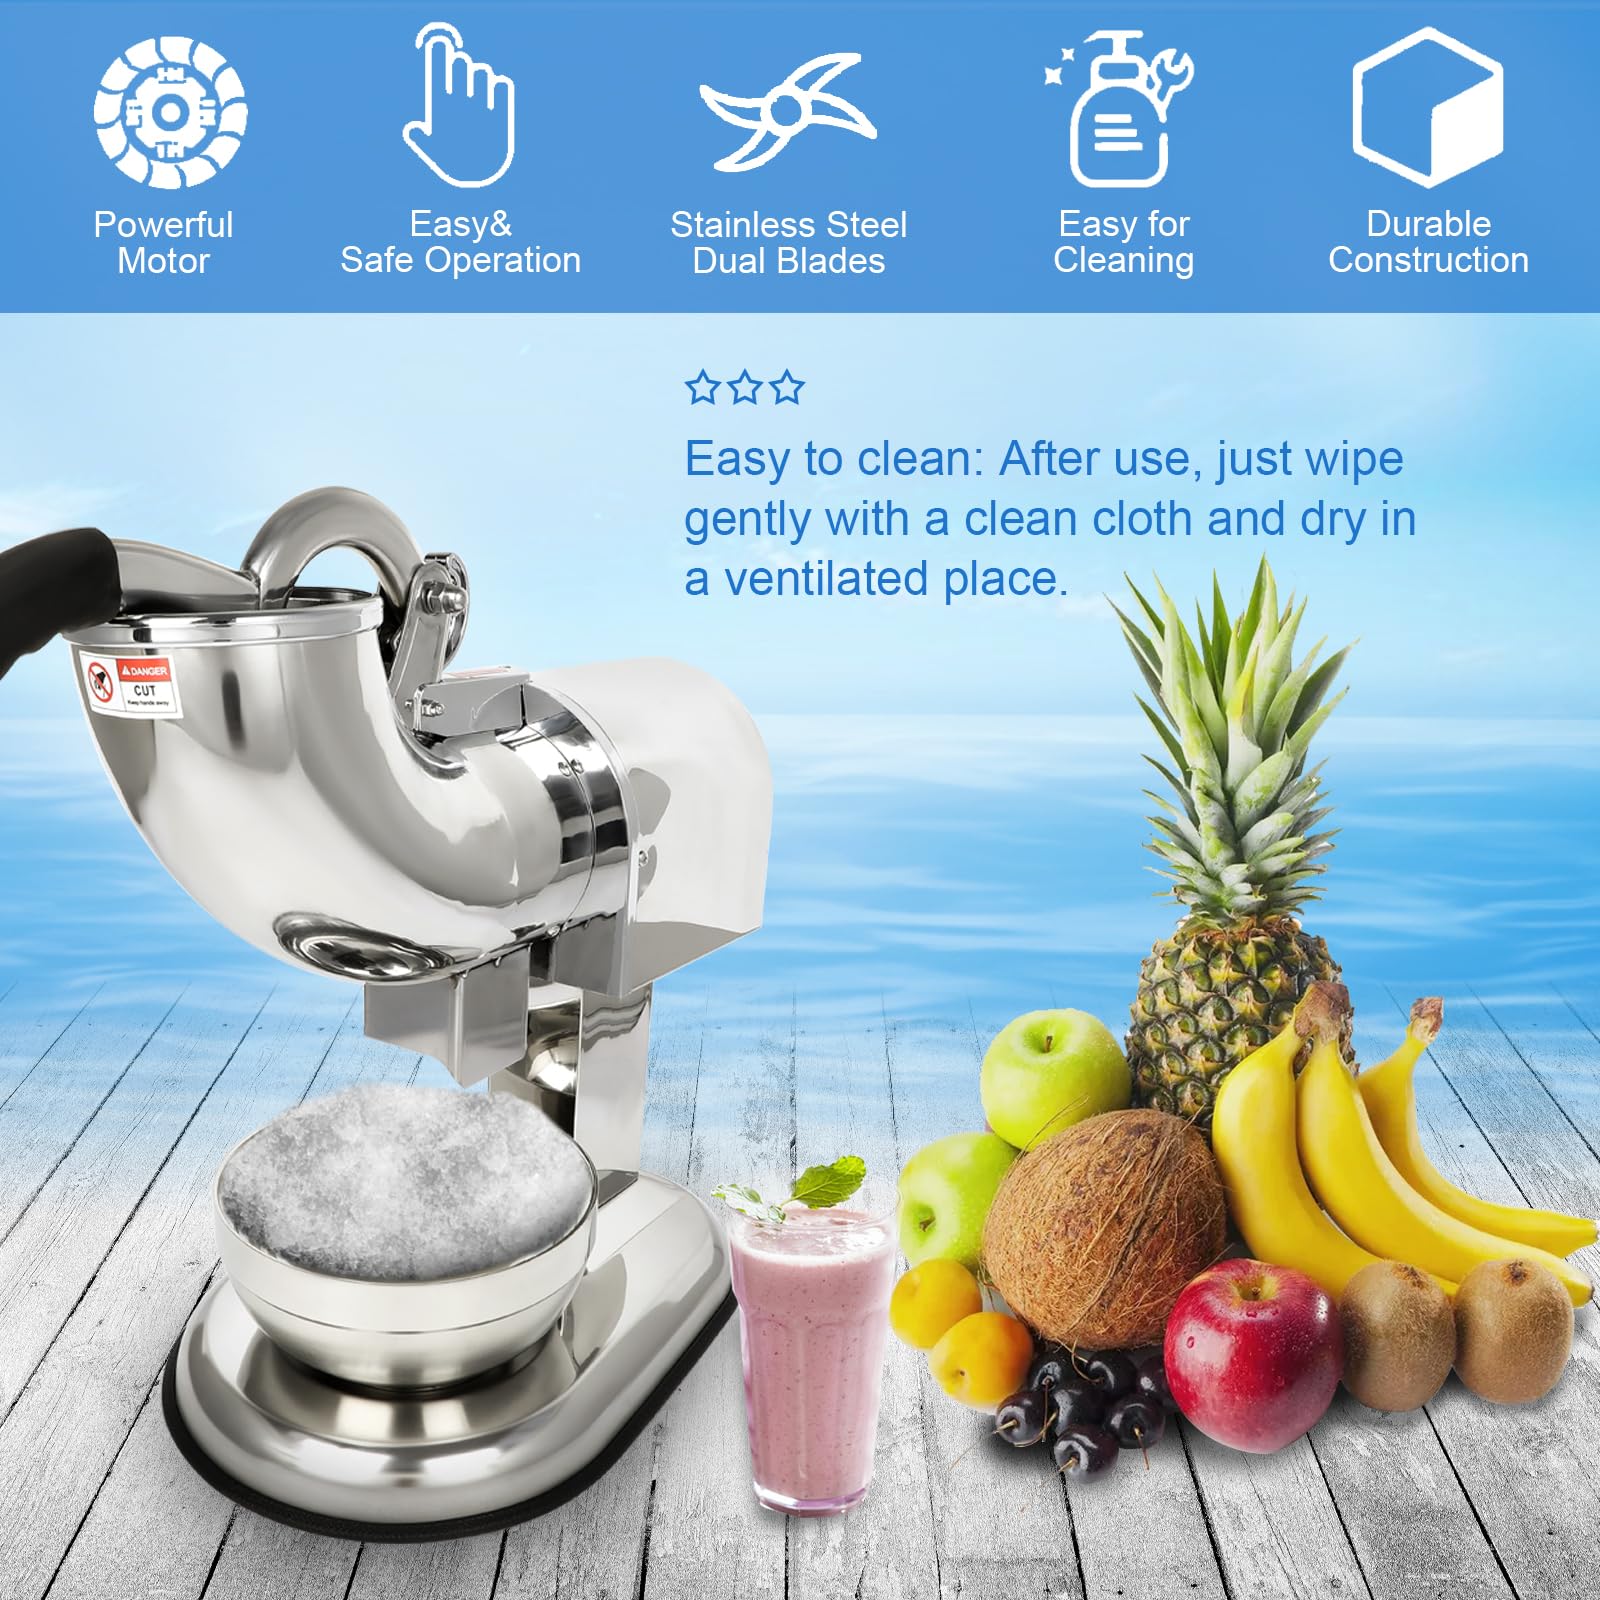 Shaved Ice Machine Electric Snow Cone Maker Machine Ice Crusher Dual Blades 440lbs/hr for Home and Commercial Ice Shaver Heavy Duty Silver